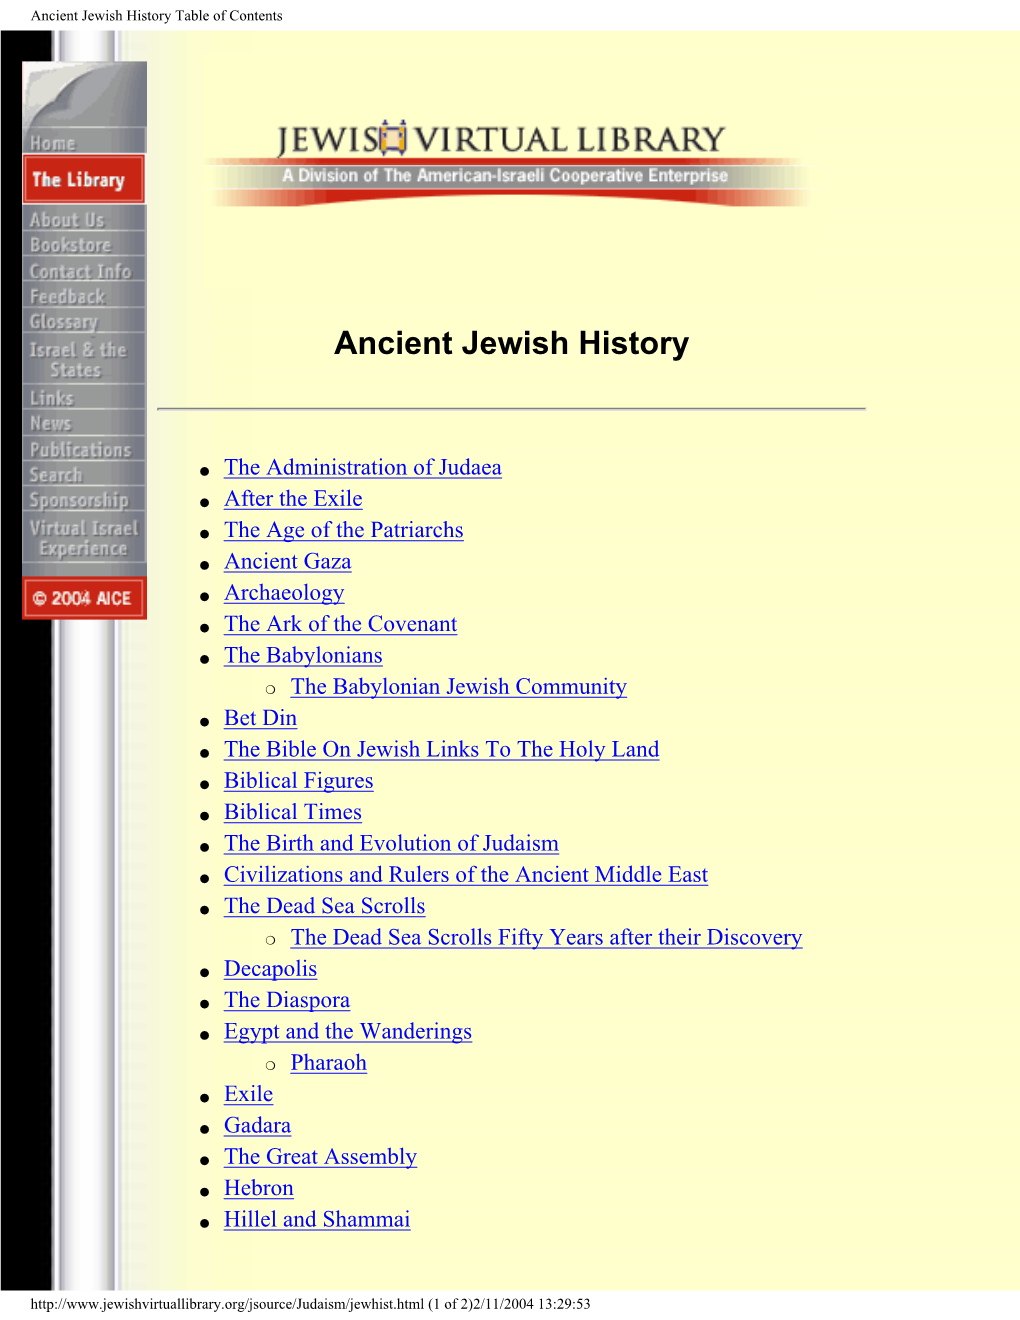 Ancient Jewish History Table of Contents